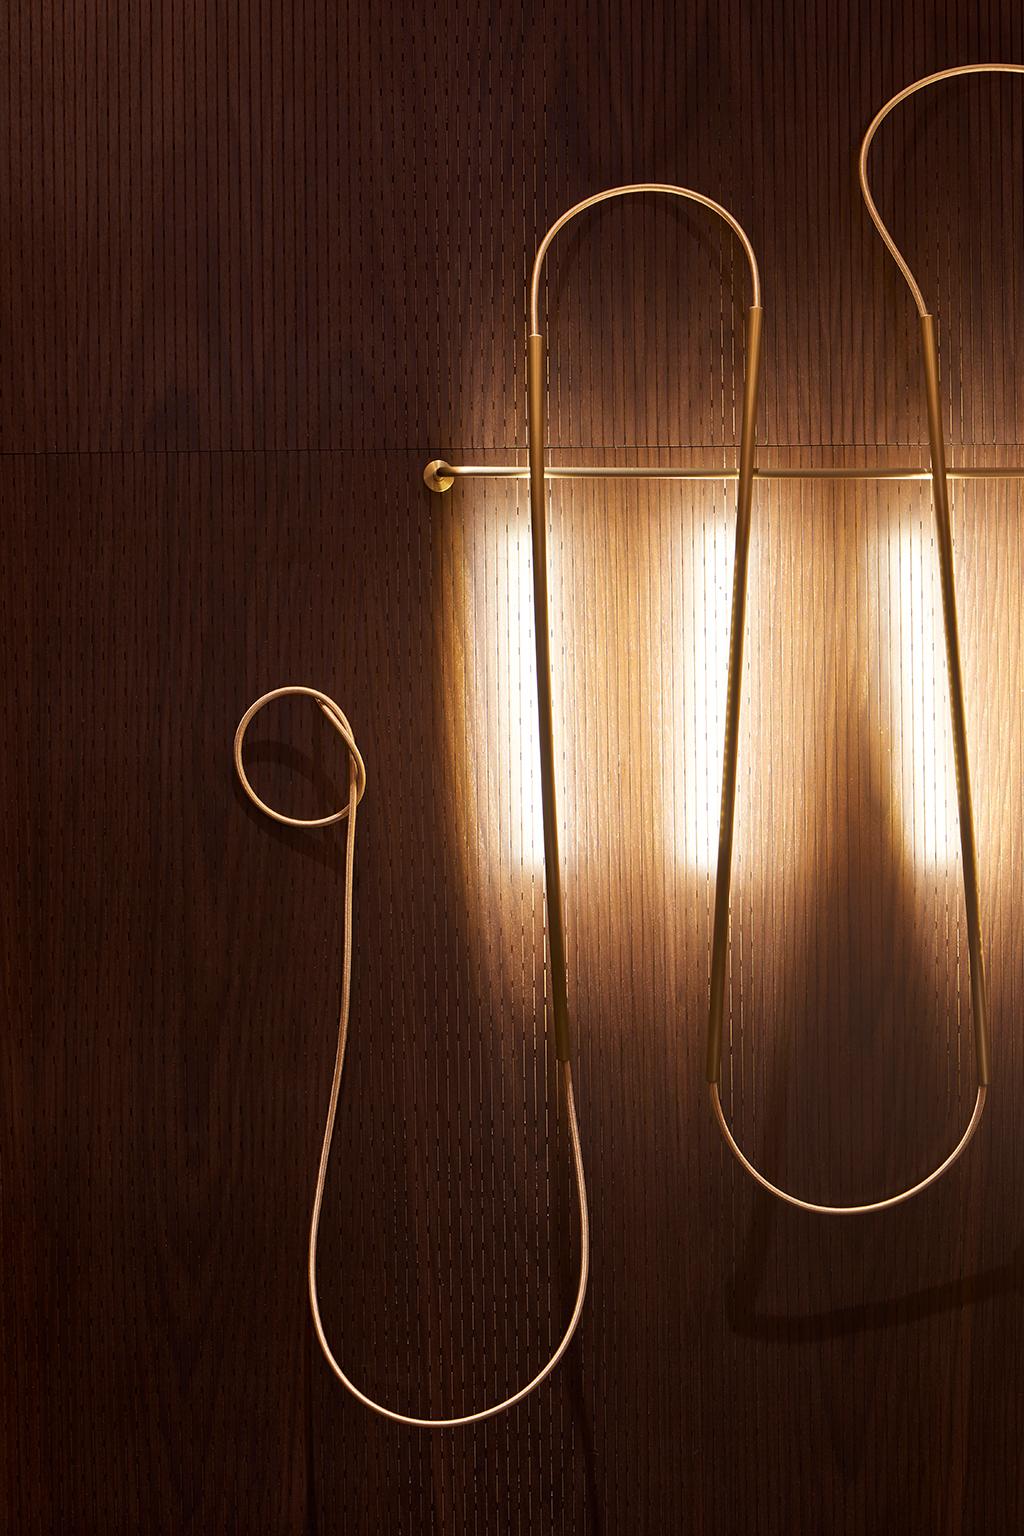 Nine Bar Line Lamp, Modern Brass Wall Mounted Sconce In Excellent Condition For Sale In Brooklyn, NY